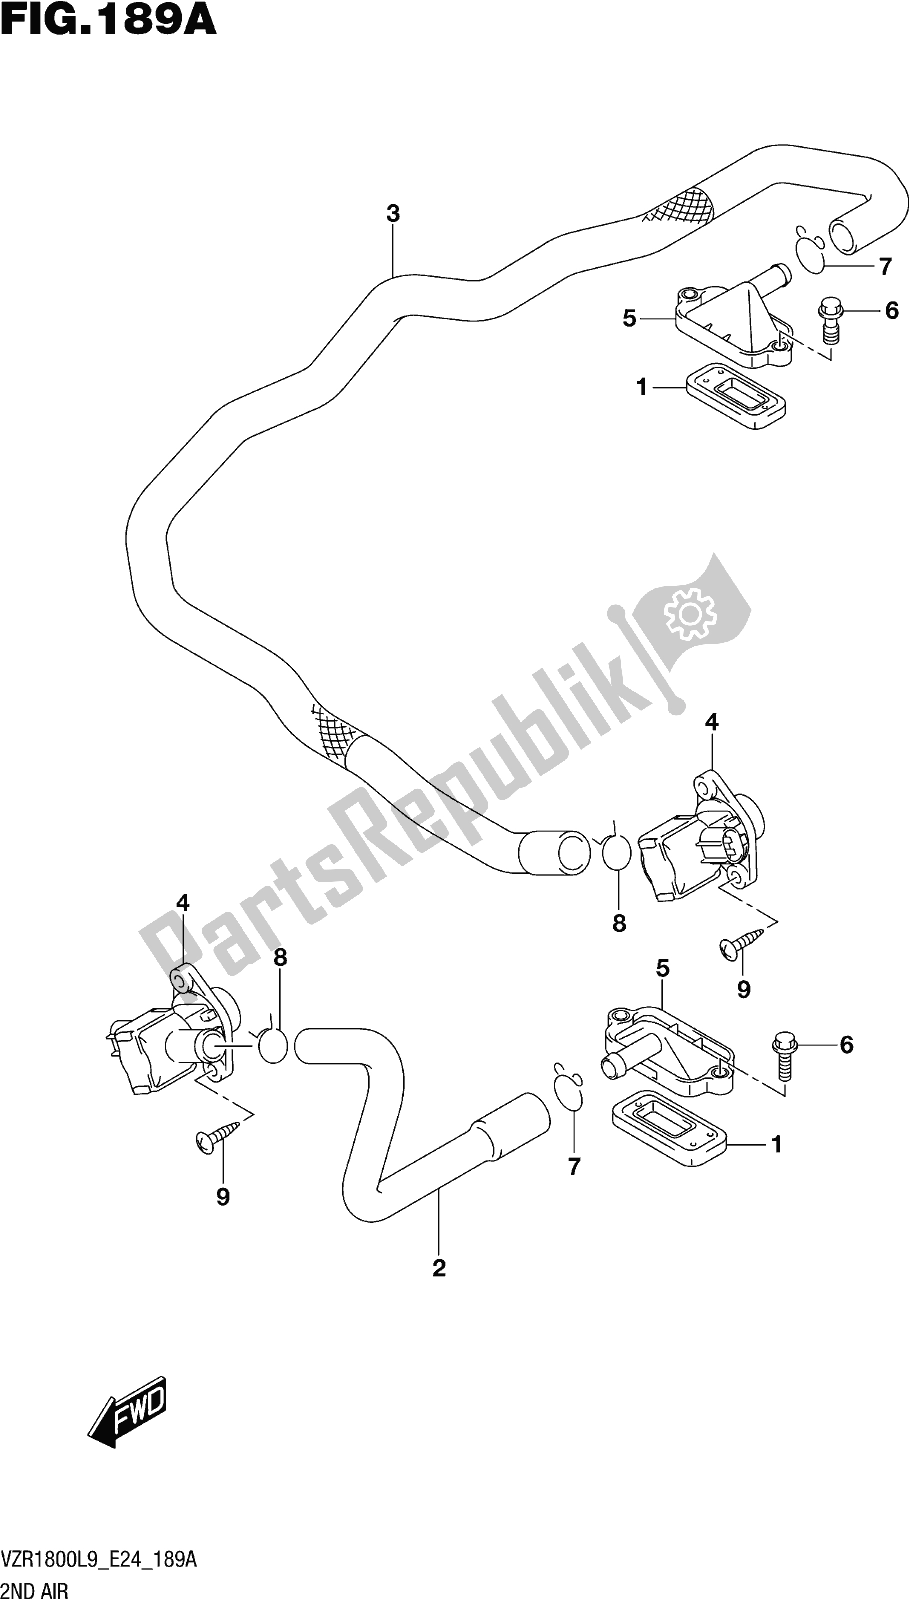 All parts for the Fig. 189a 2nd Air of the Suzuki VZR 1800 BZ 2019